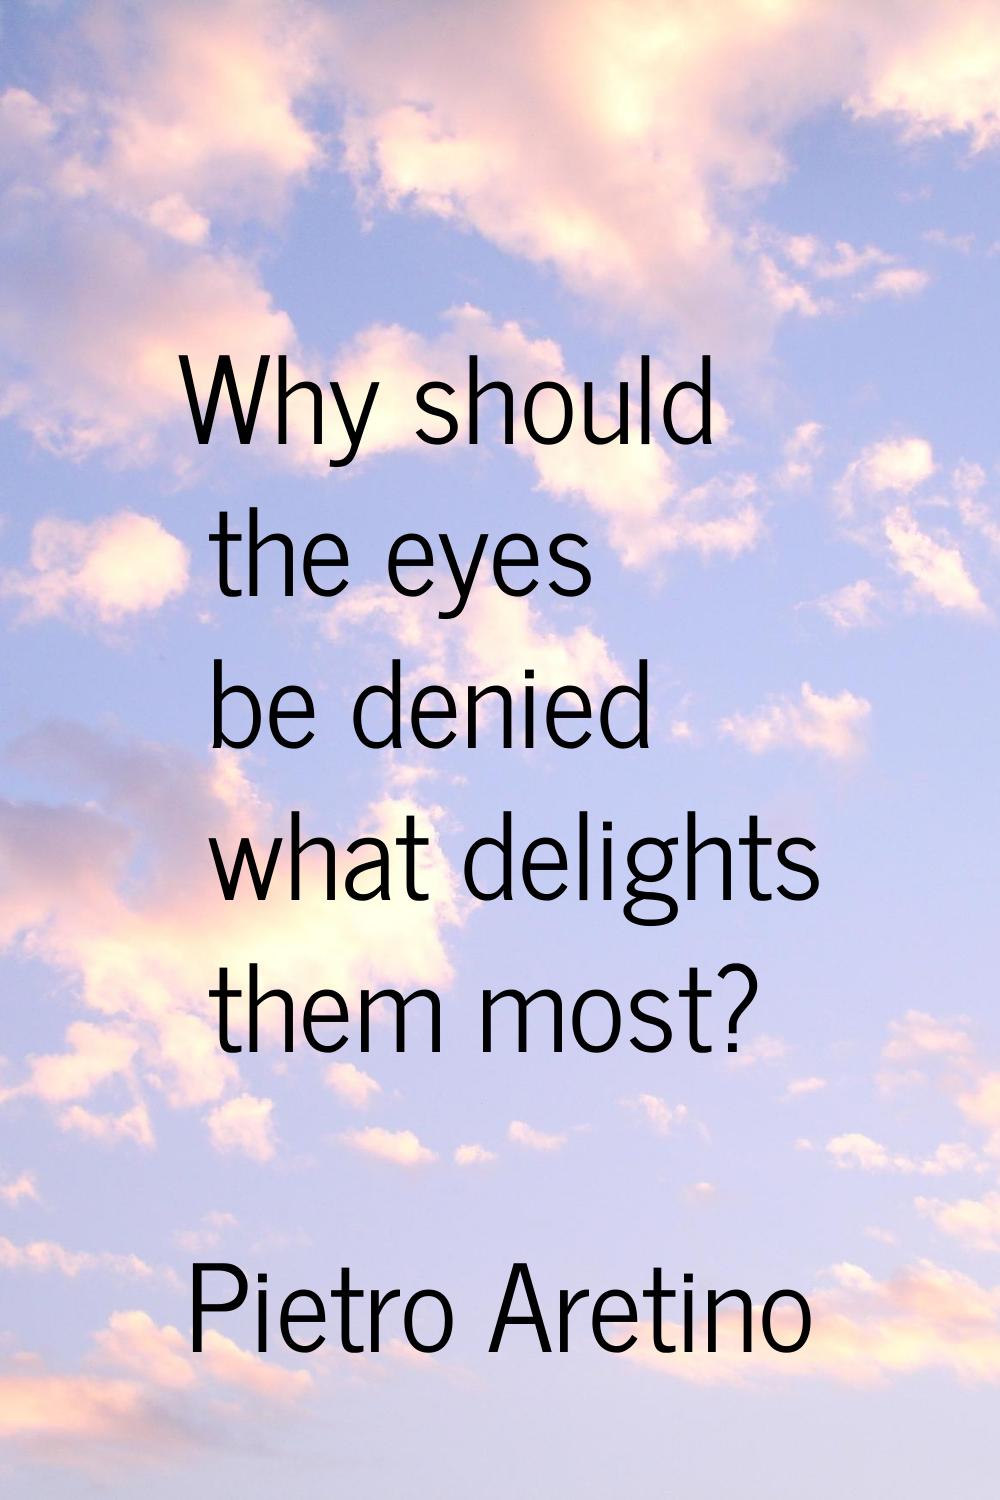 Why should the eyes be denied what delights them most?